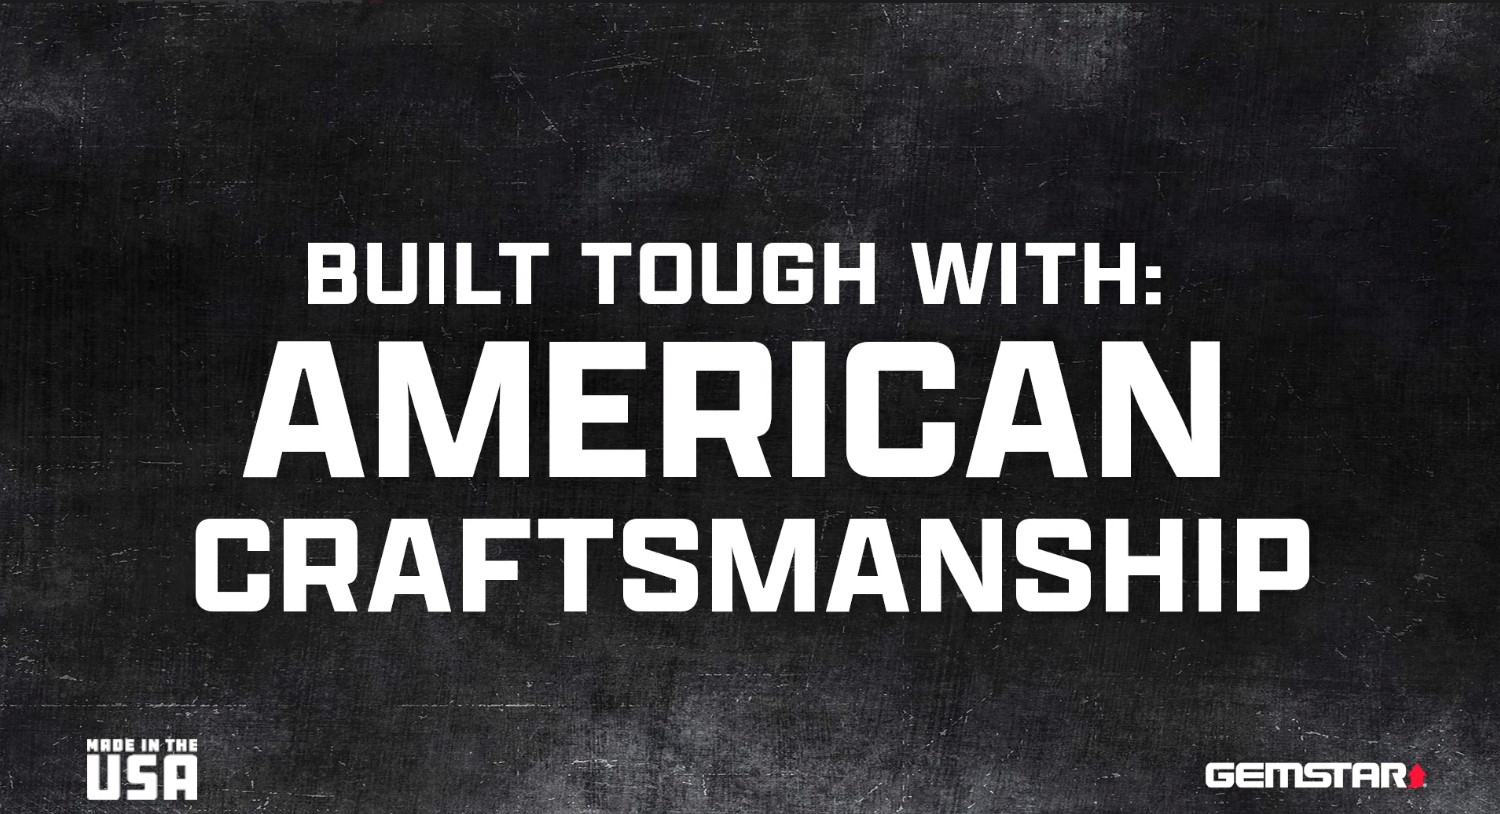 Gemstar products are built tough with American craftsmanship